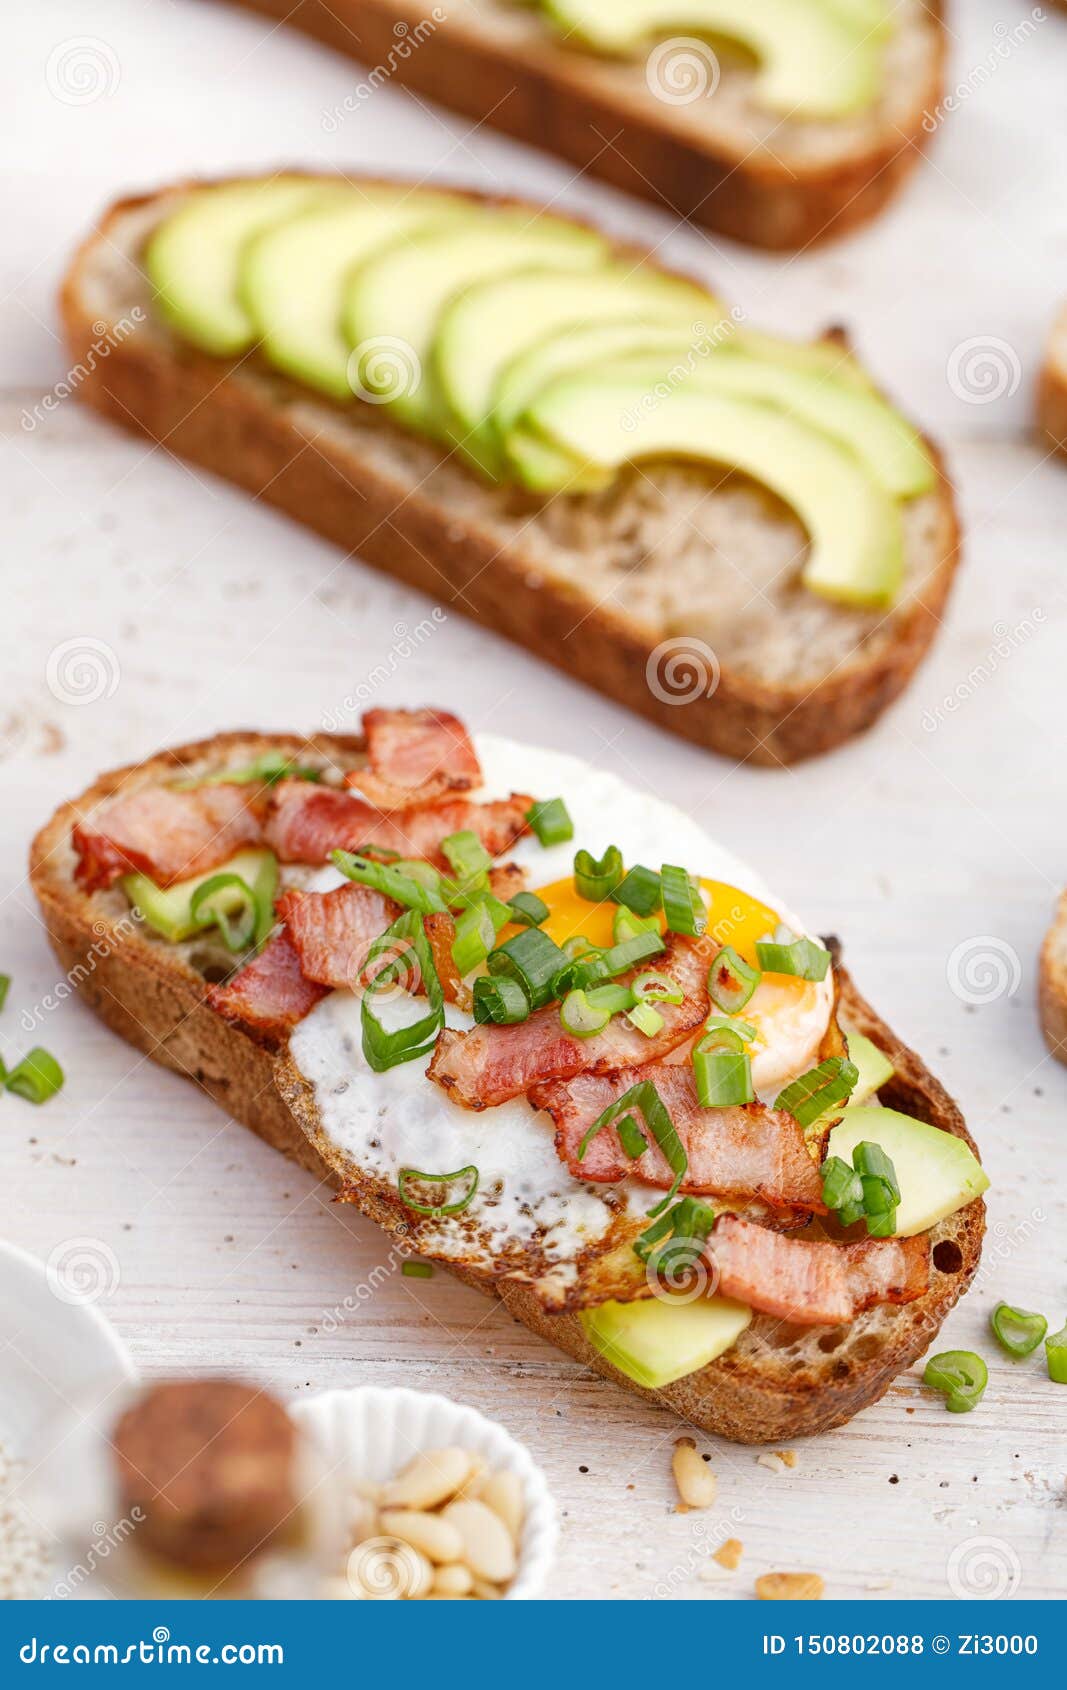 How Many Slices of Bread Does an Open Sandwich Have? 